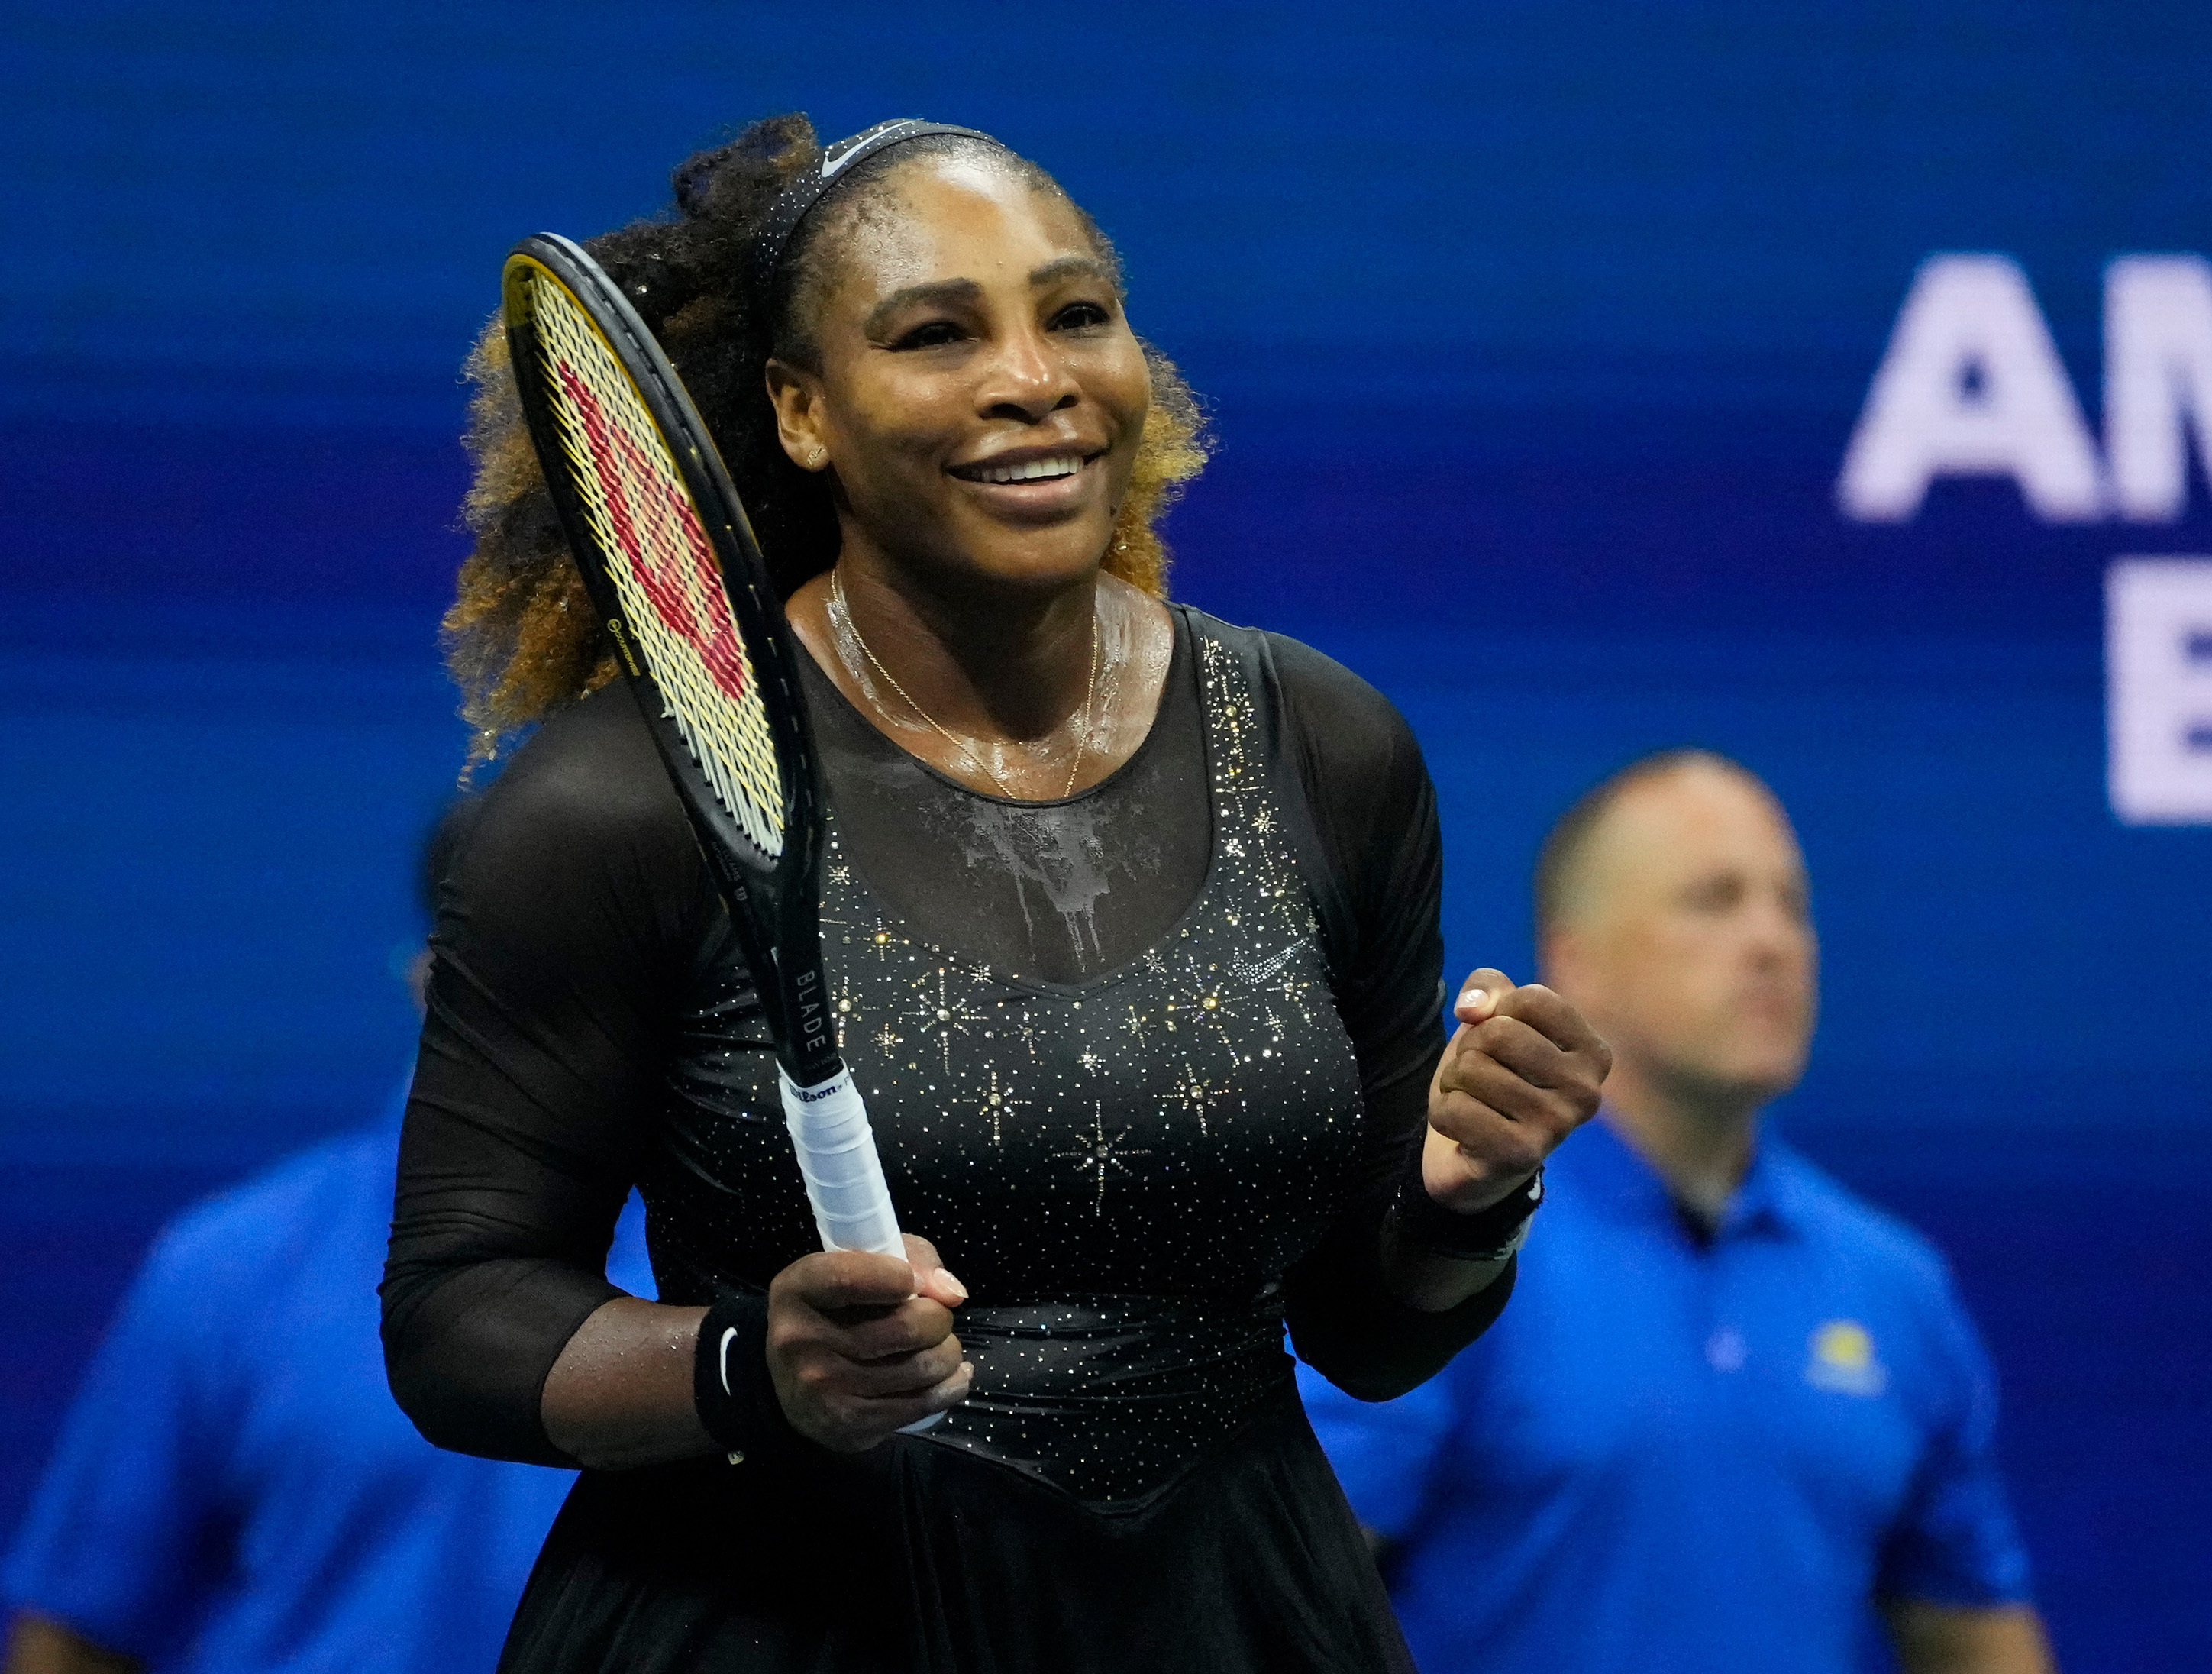 Serena Williams plays her second match at the US Open (USA Today Sports)